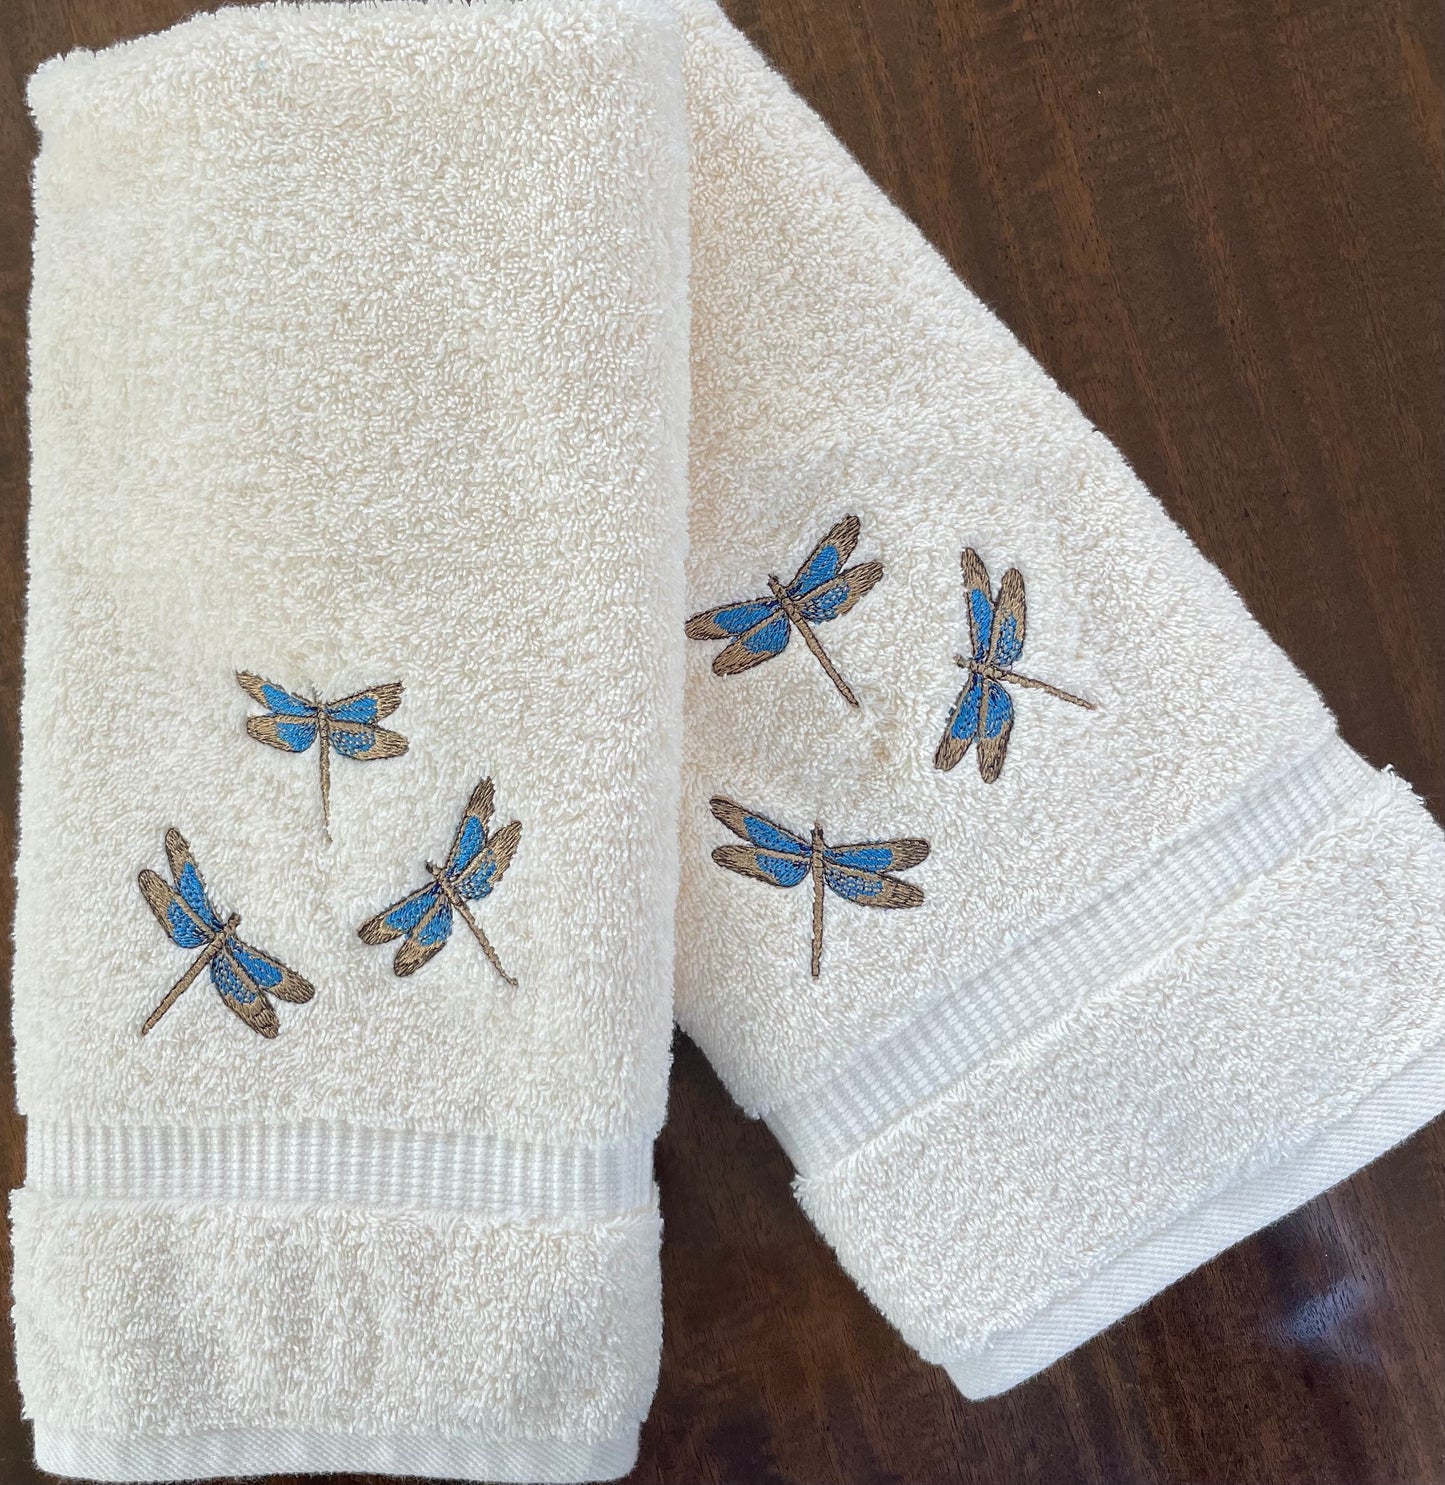 Dragonfly Embroidered Guest Bath Hand Towel. Trio of Dragonflies on Cotton Hand Towel